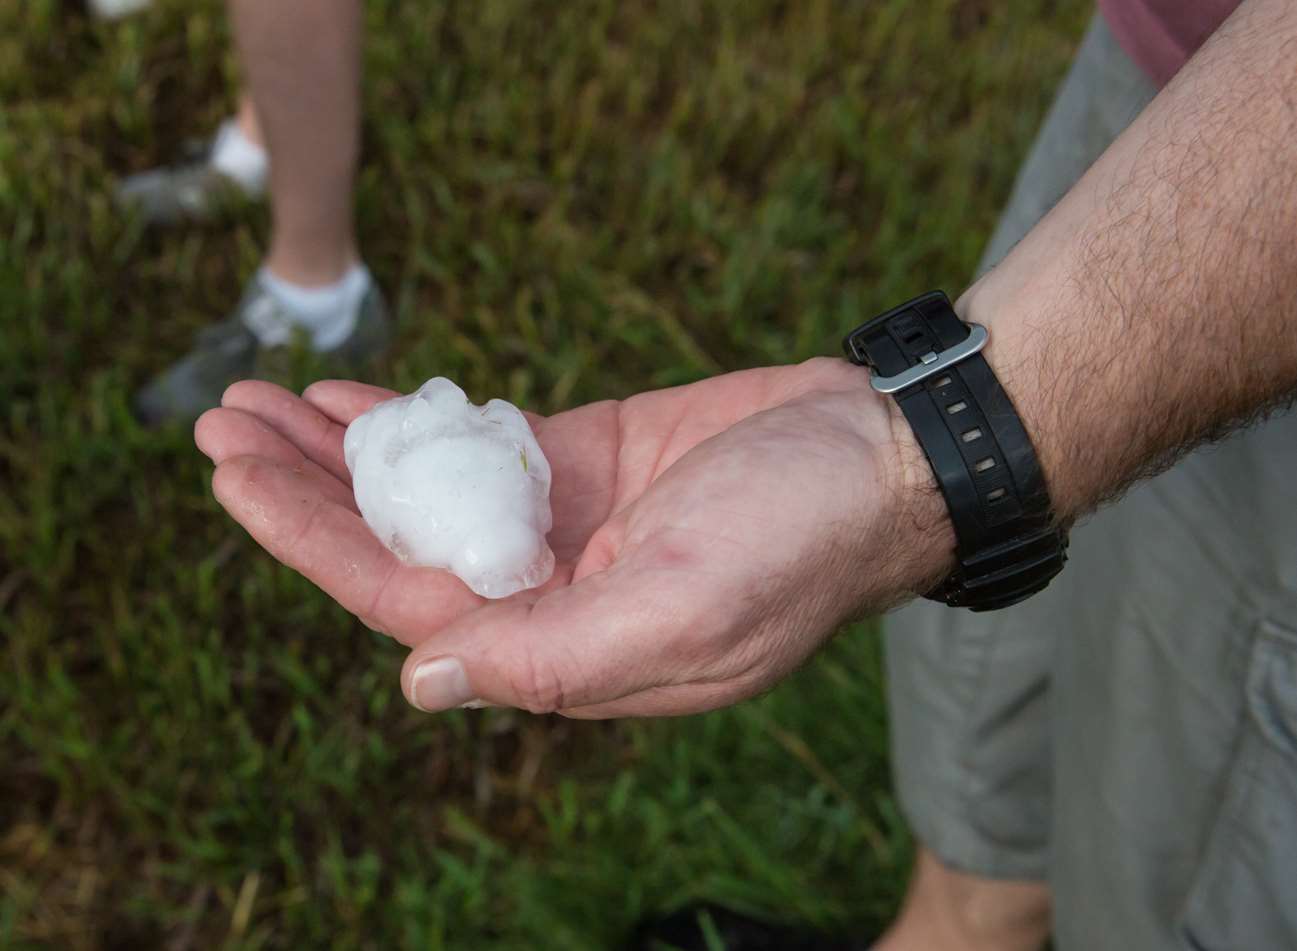 The tornadoes produced huge hail